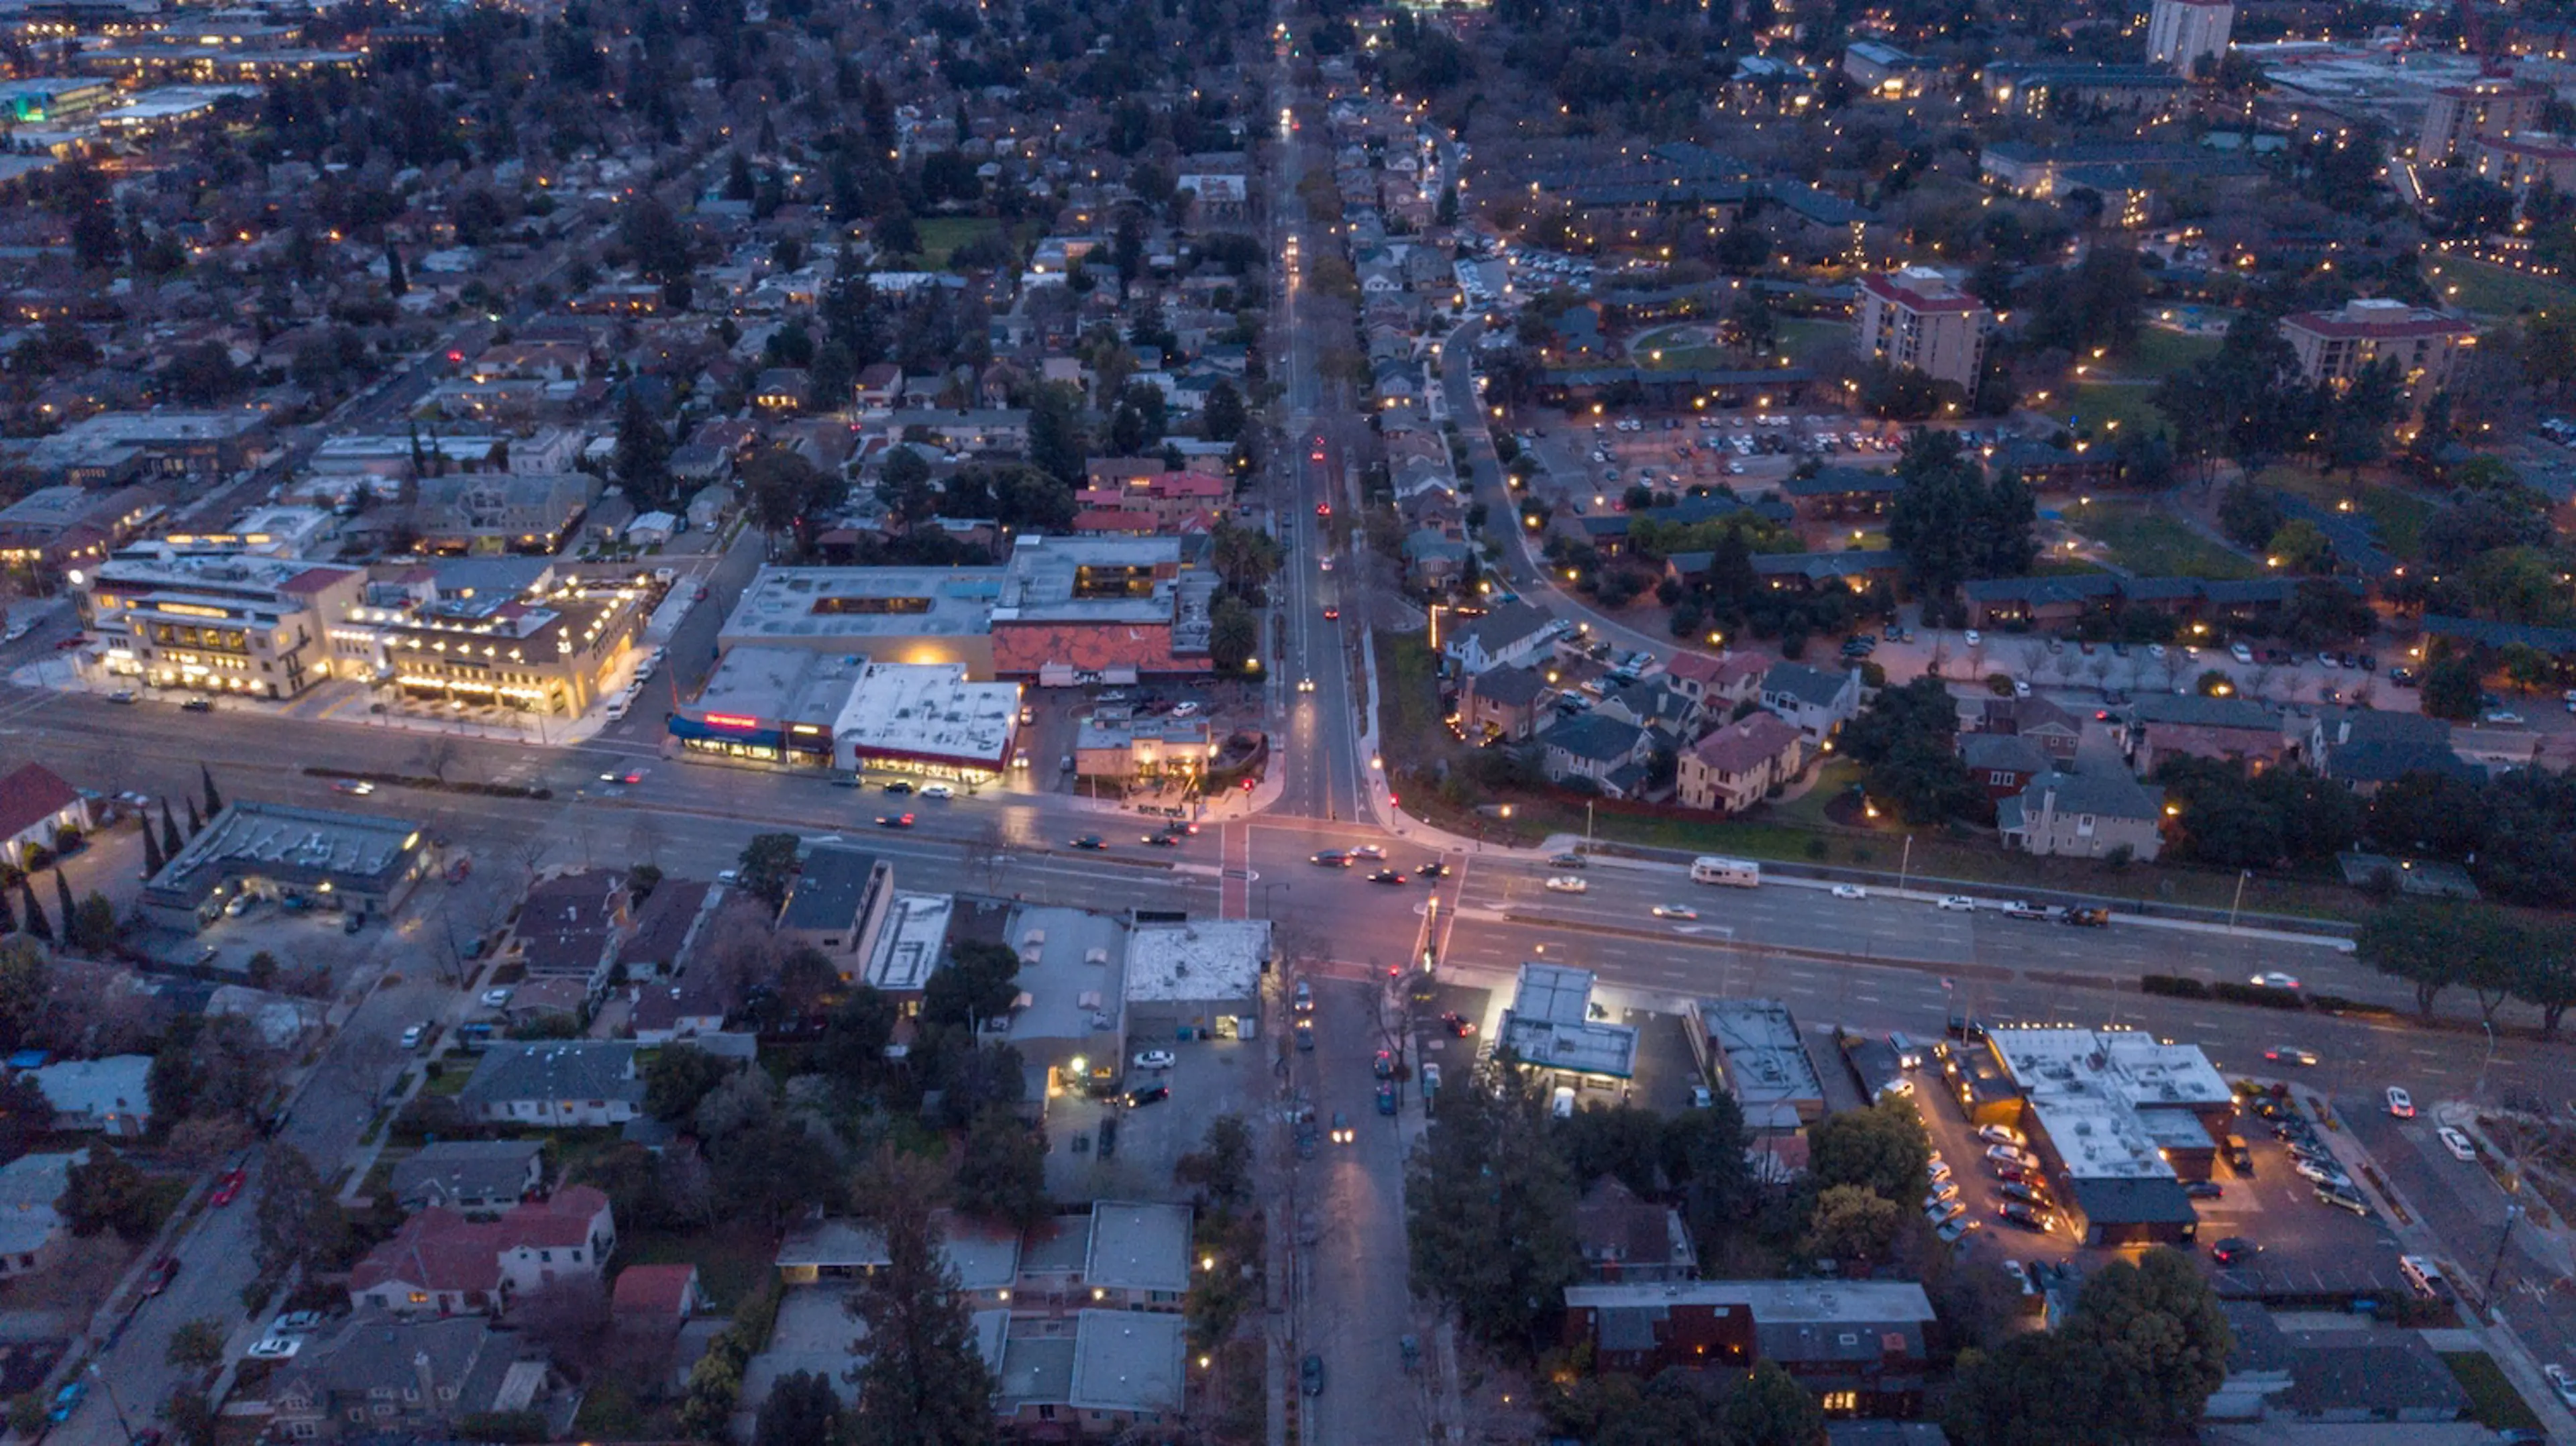 Palo Alto at night from above